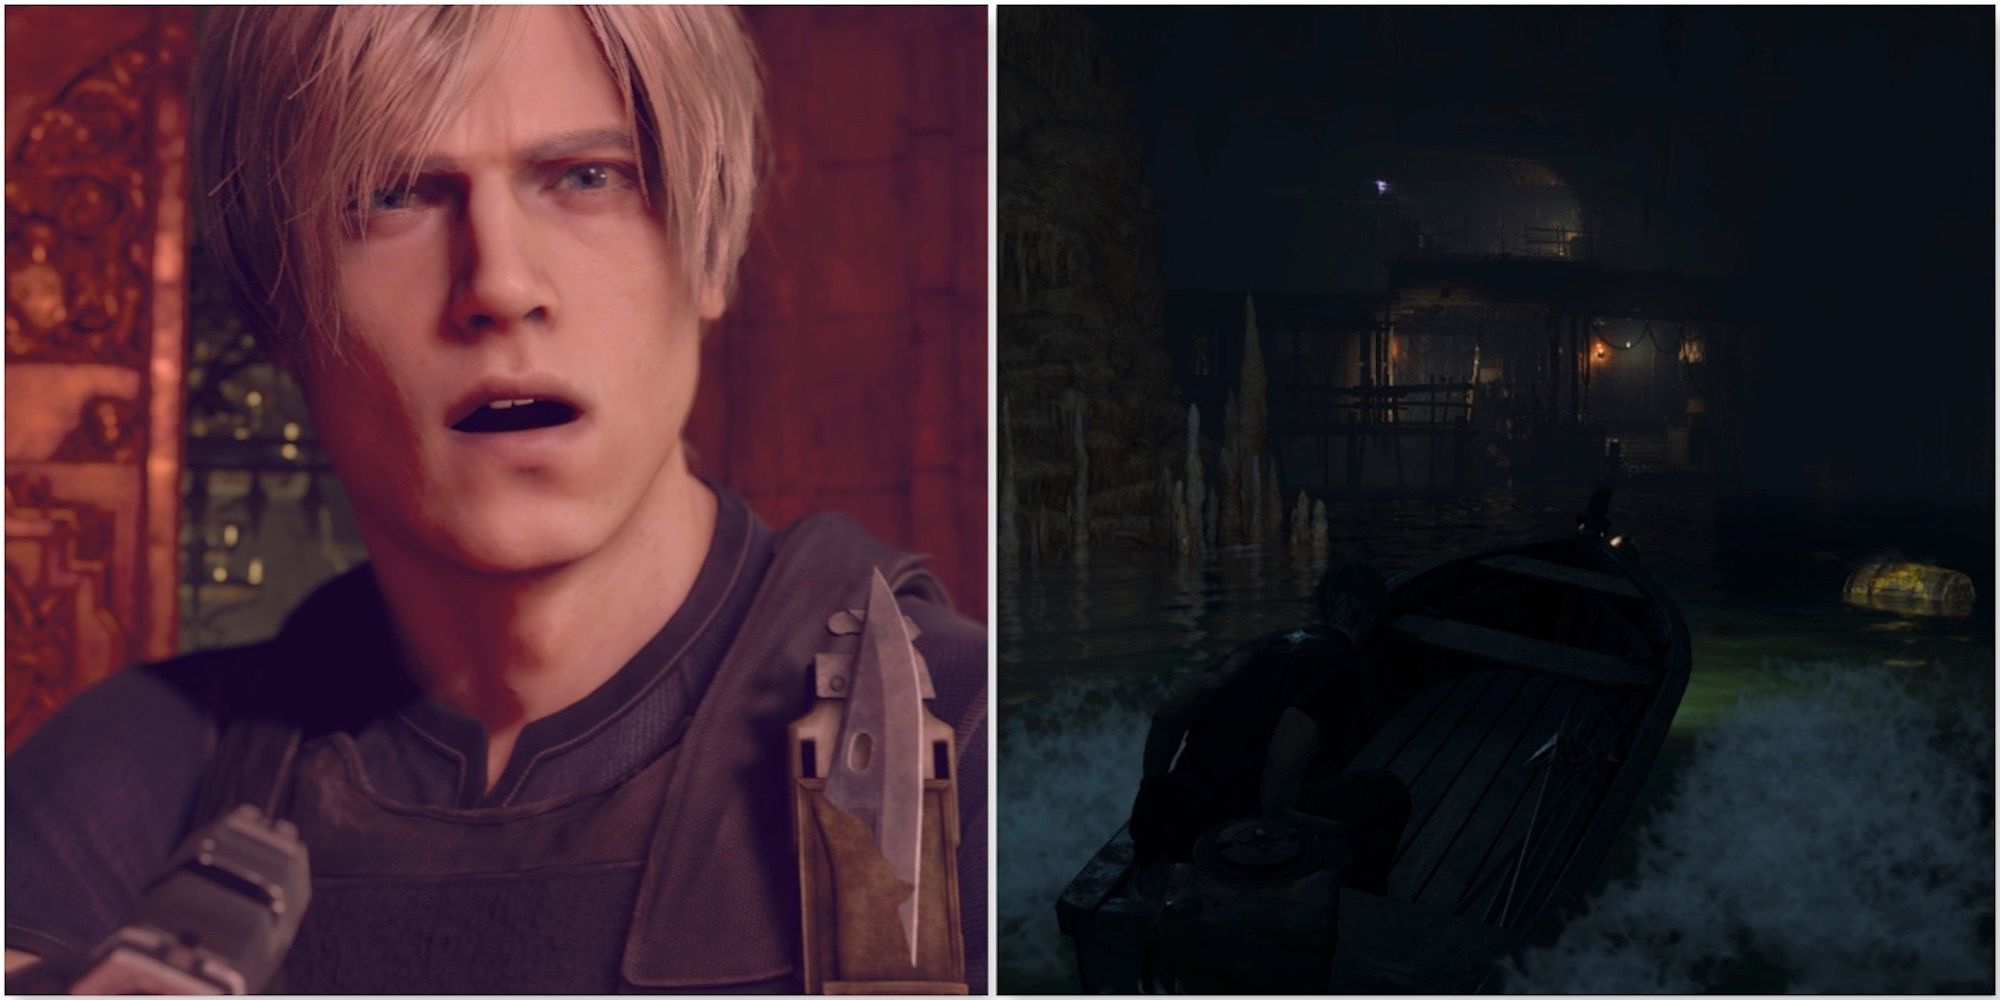 Leon and exploring in the boat in the Resident Evil 4 remake